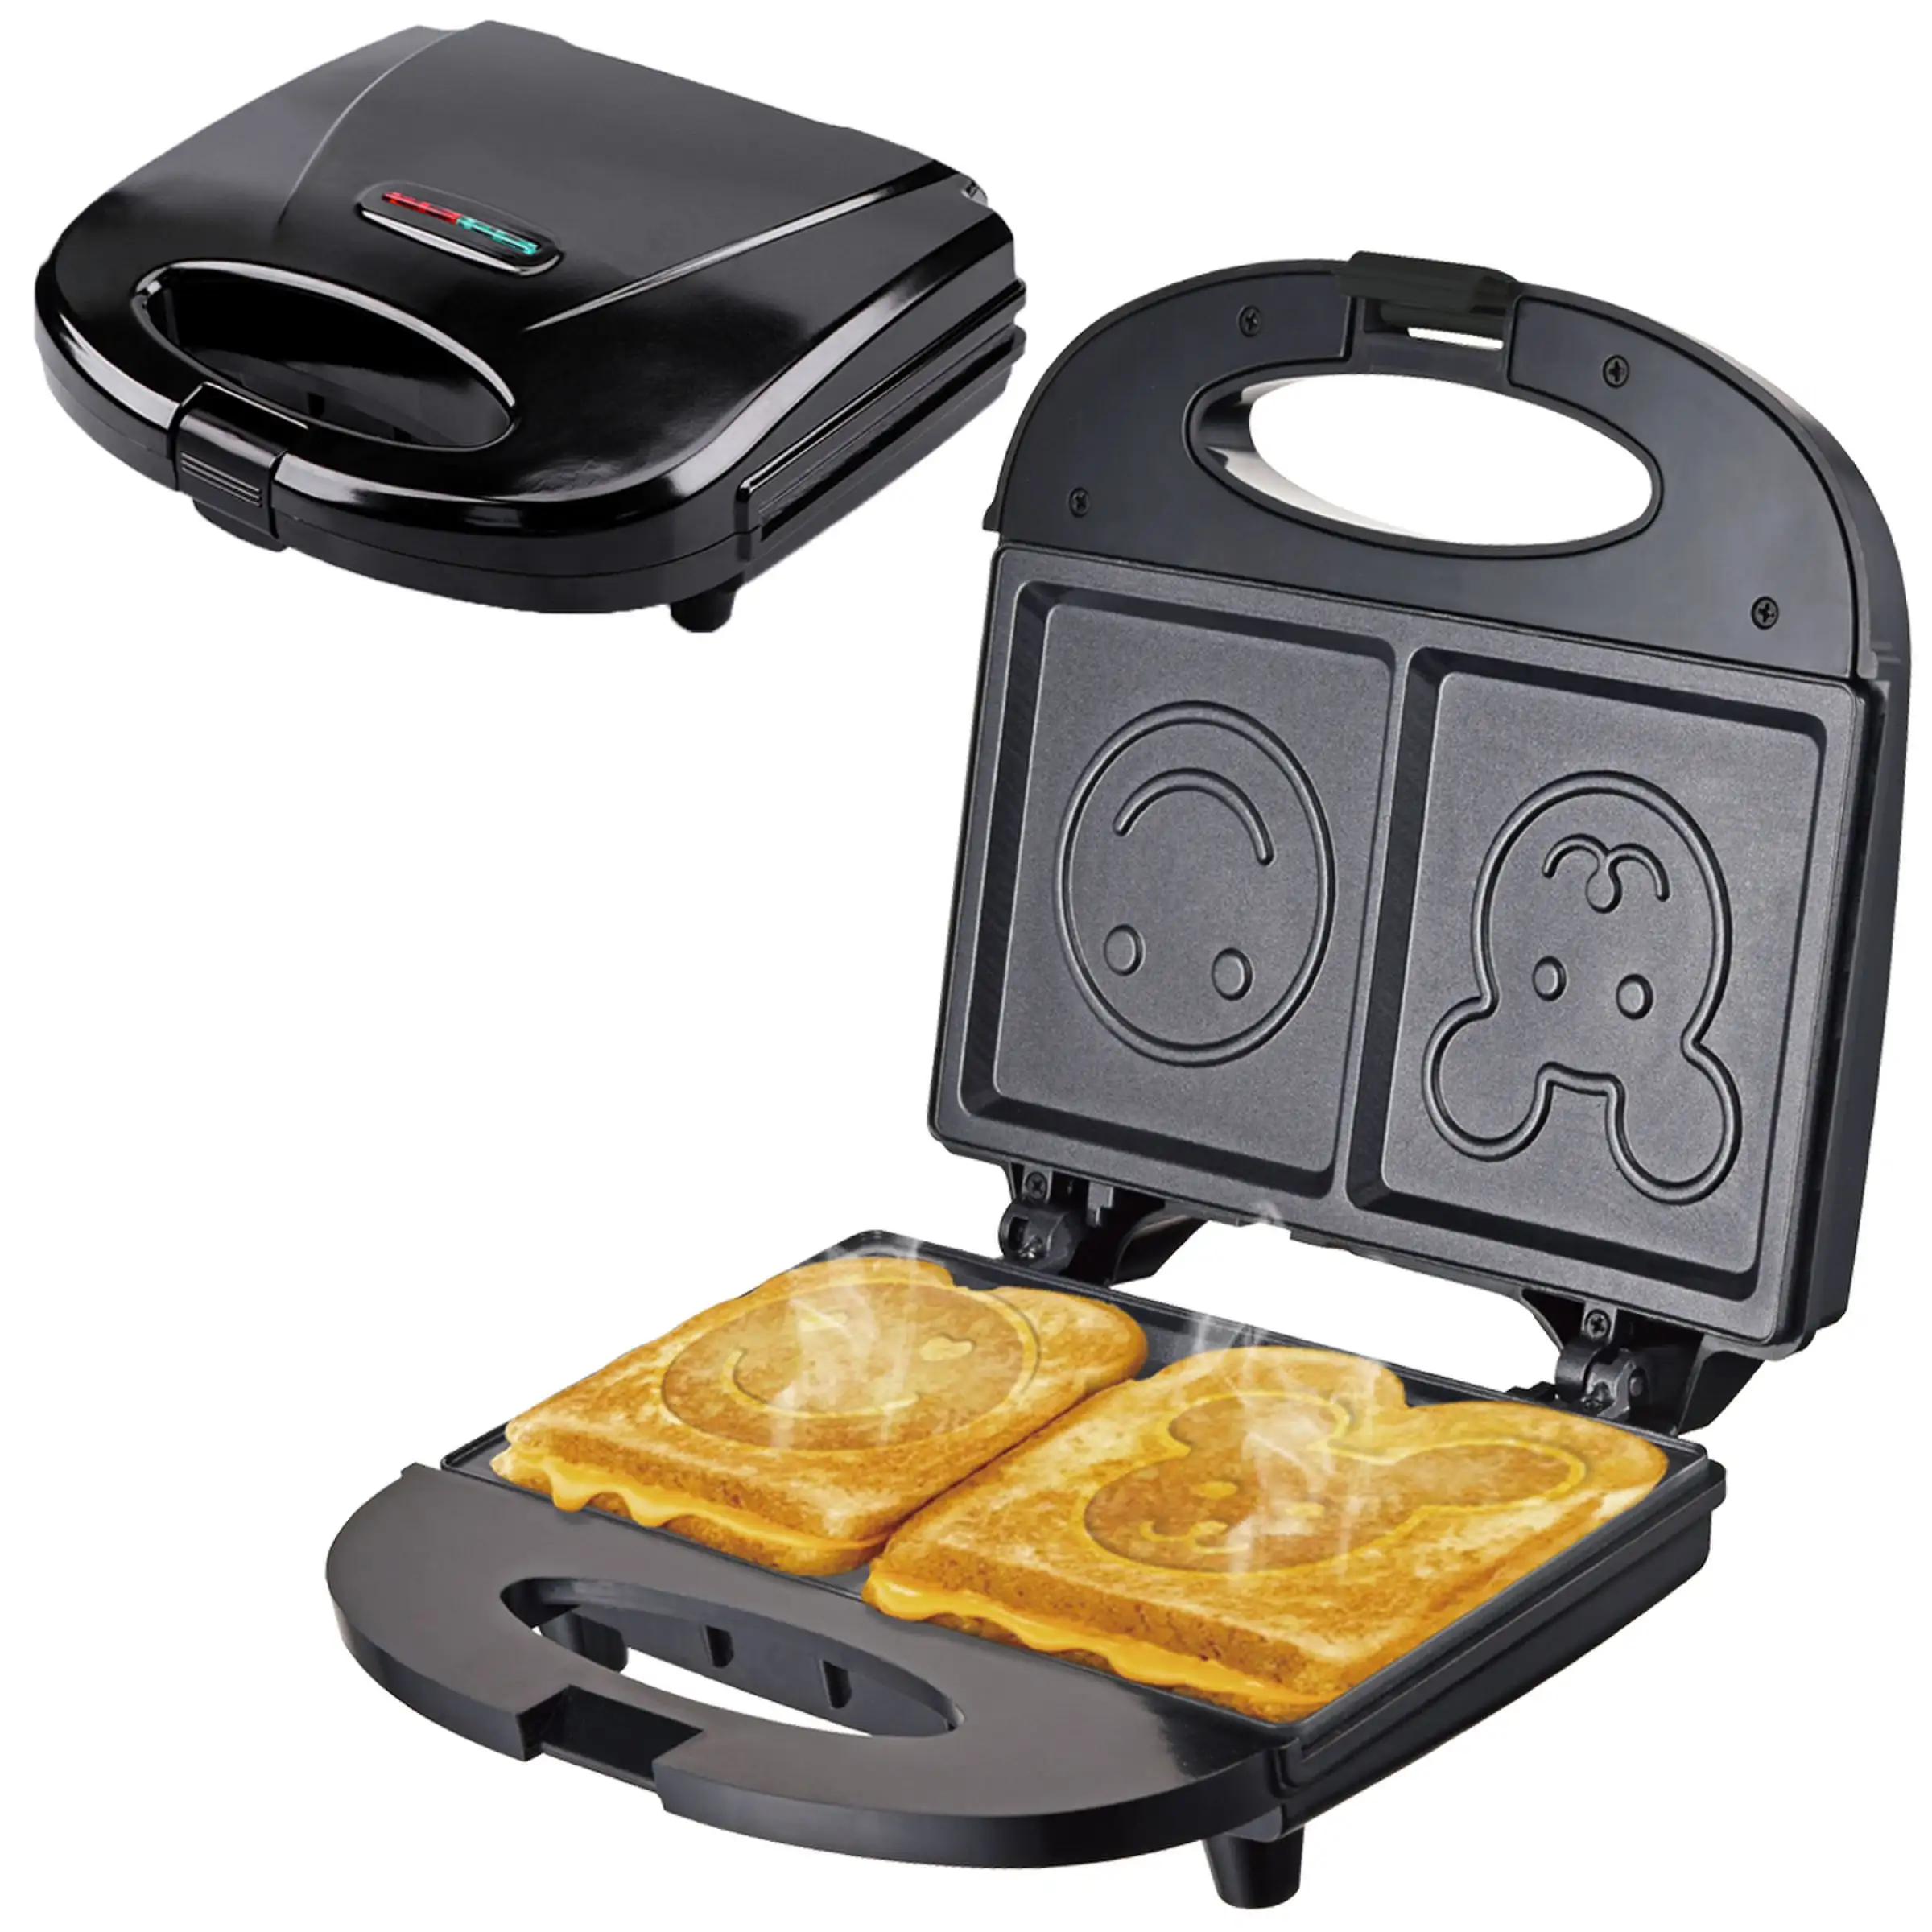 On Sale 2 Slice Panini Waffle Maker Cartoon Smiley Face Pattern Toster Sandwich Maker With Anti-Skid Feet